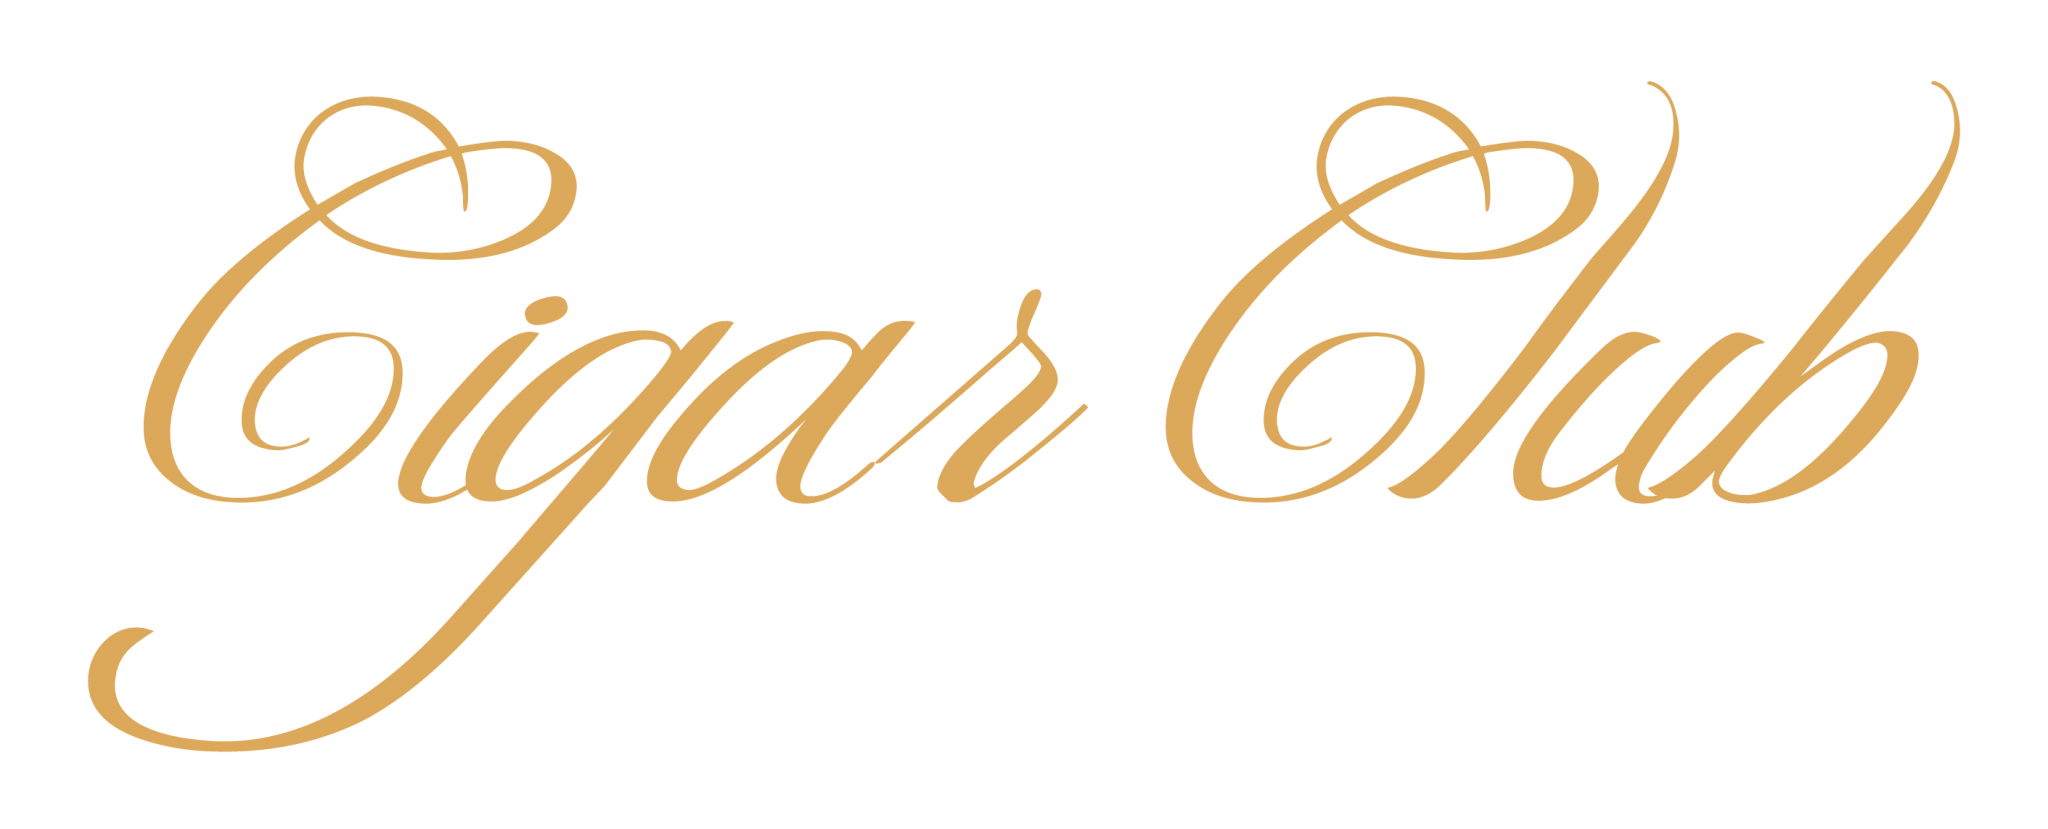 Cigar Club SA – Premium Cigars delivered to your door